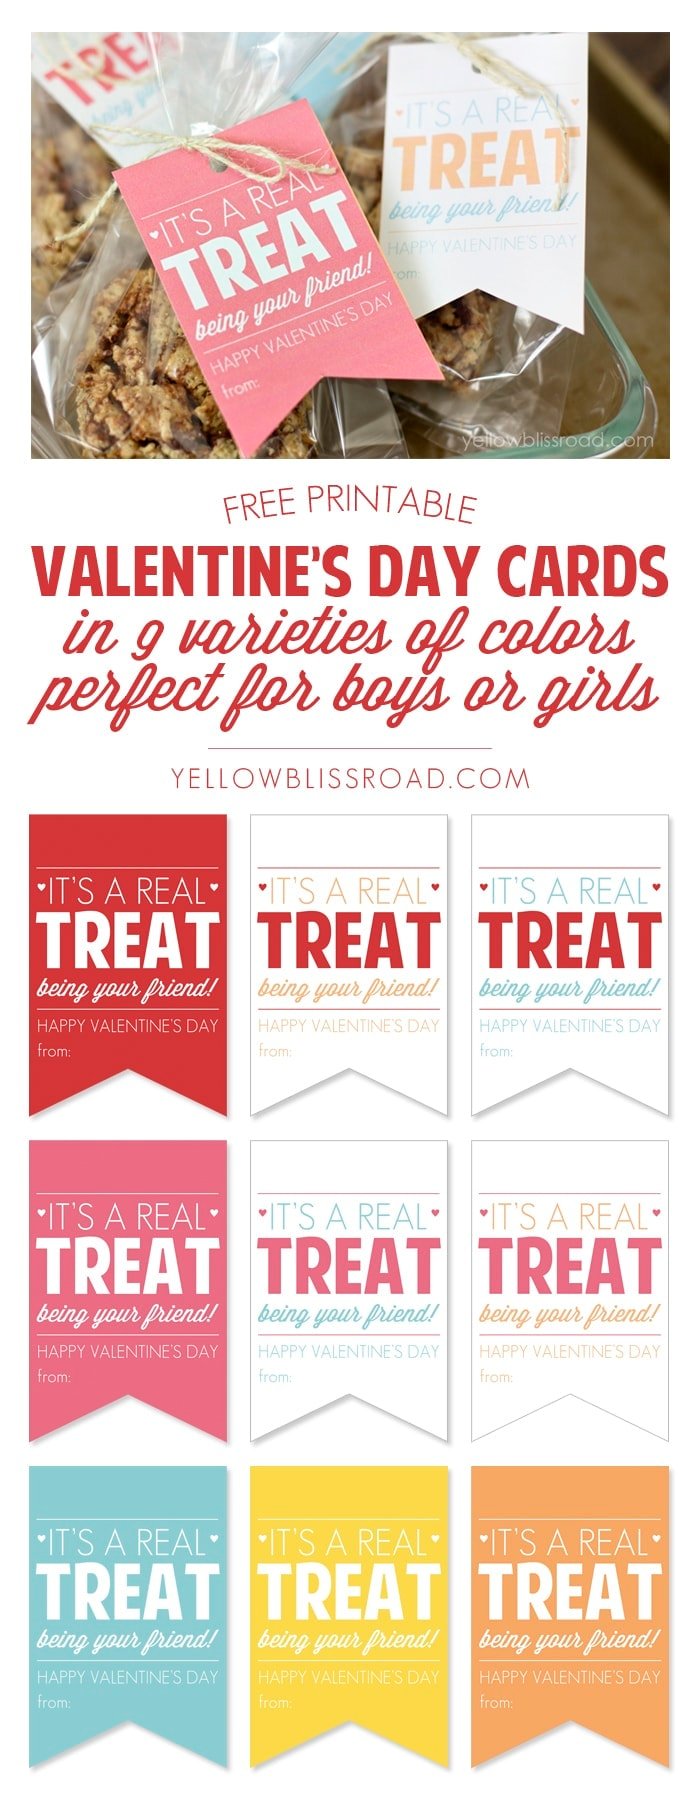 Free Printable Valentine Treat Cards for Boys or Girls in 9 Color Combos